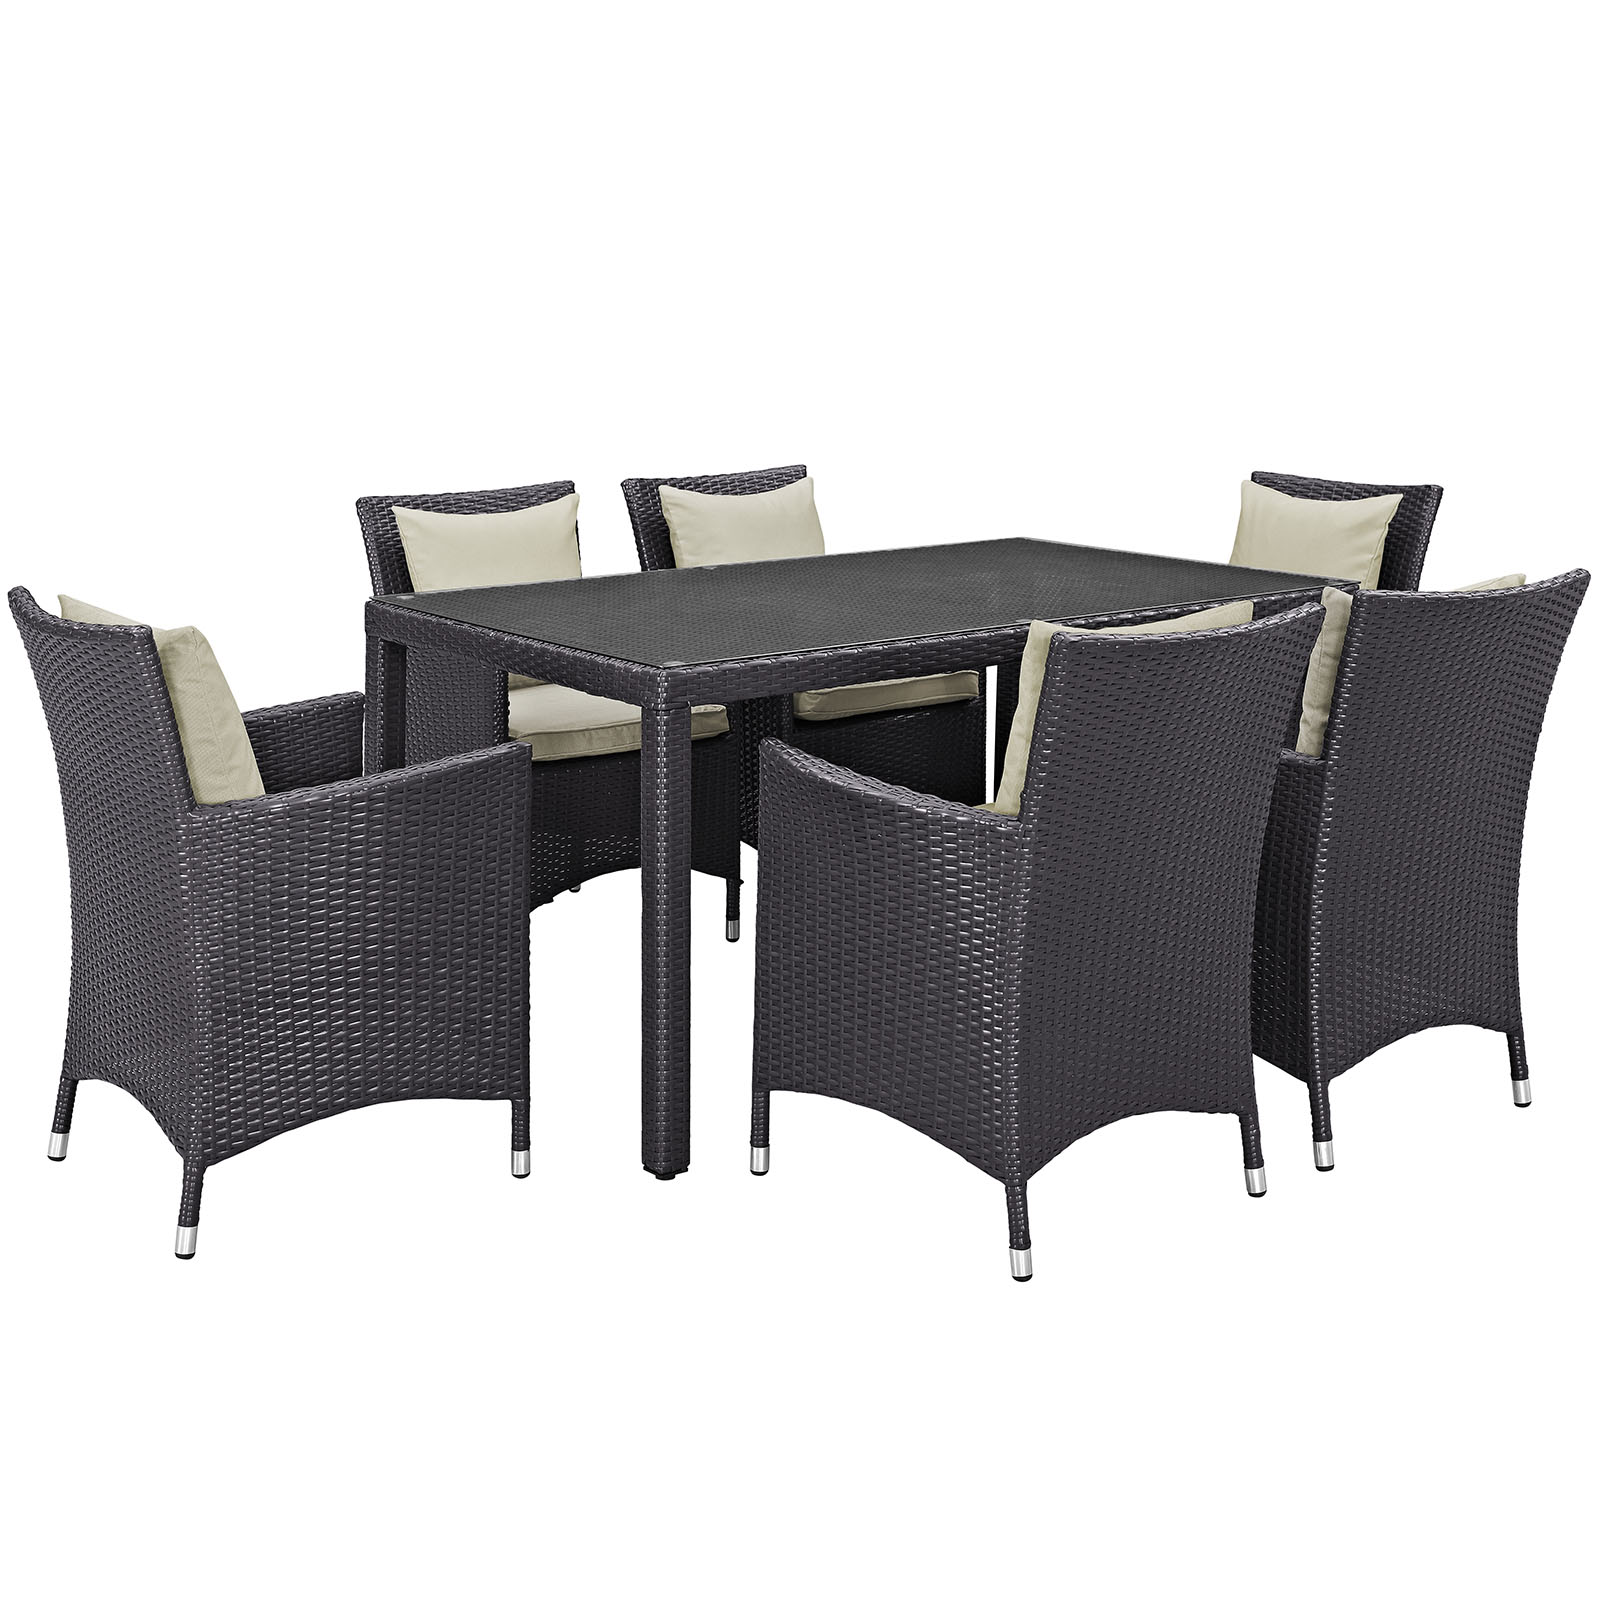 Modern Contemporary Urban Design Outdoor Patio Balcony Seven PCS Dining Chairs and Table Set, Beige, Rattan - image 1 of 7